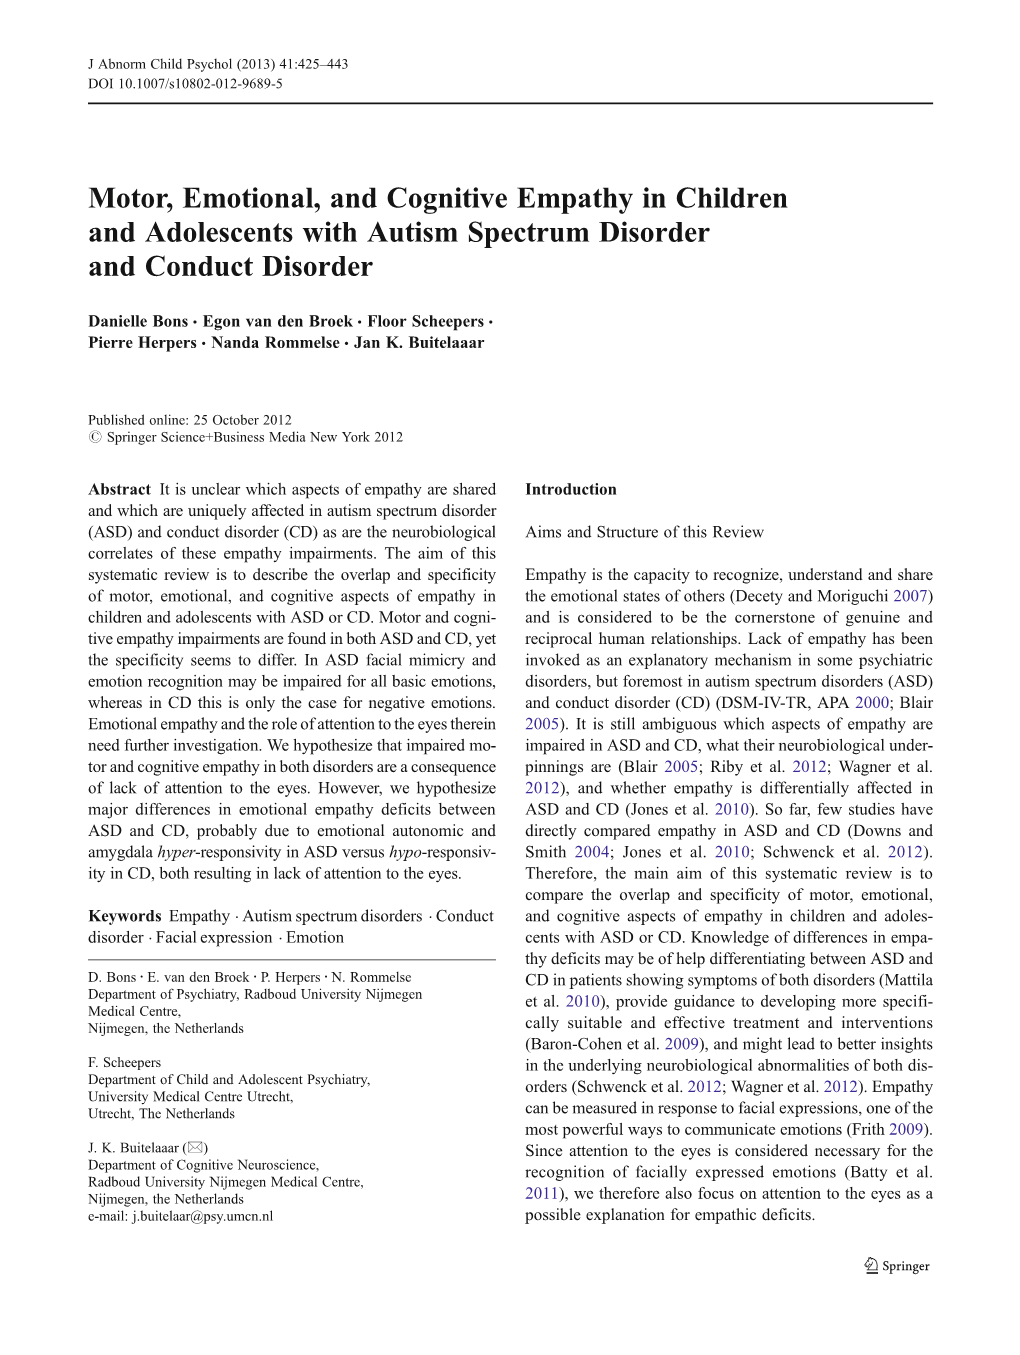 Motor, Emotional, and Cognitive Empathy in Children and Adolescents with Autism Spectrum Disorder and Conduct Disorder